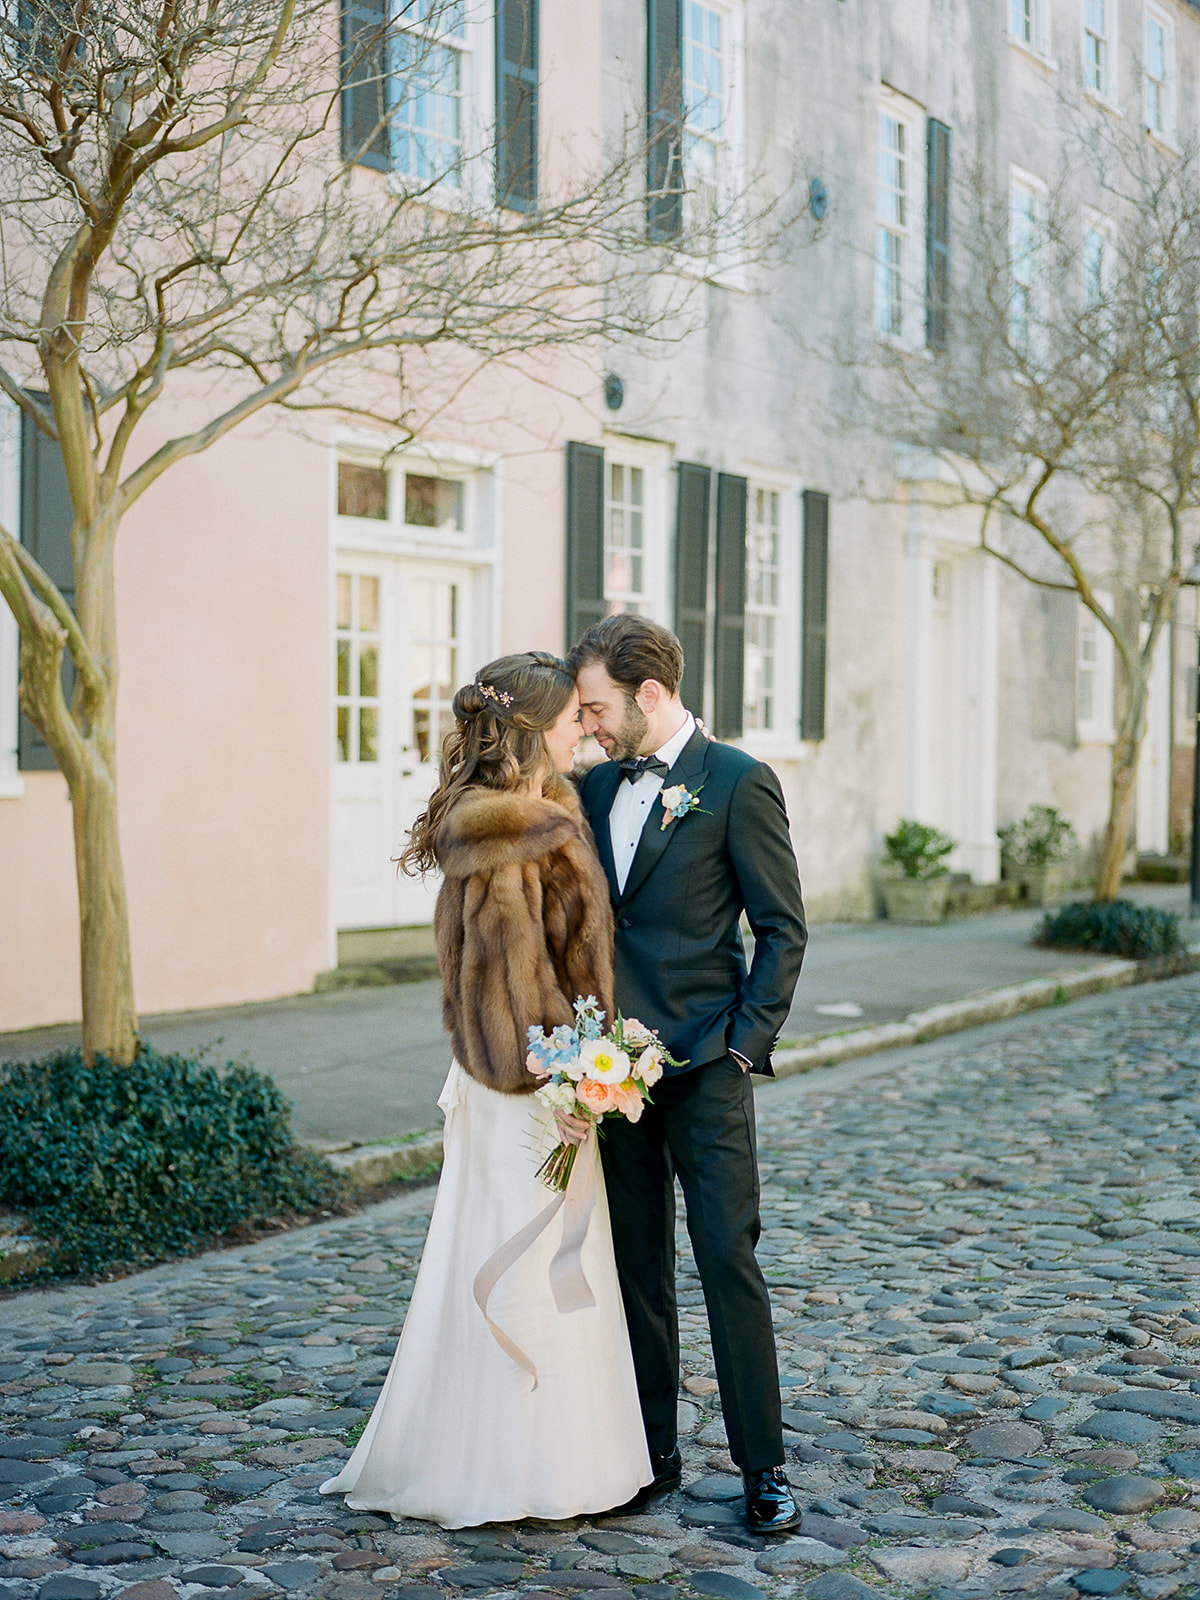 pastel building cobblestoned street wedding portraits with bride in a vintage inspired gown and groom in a black tux 